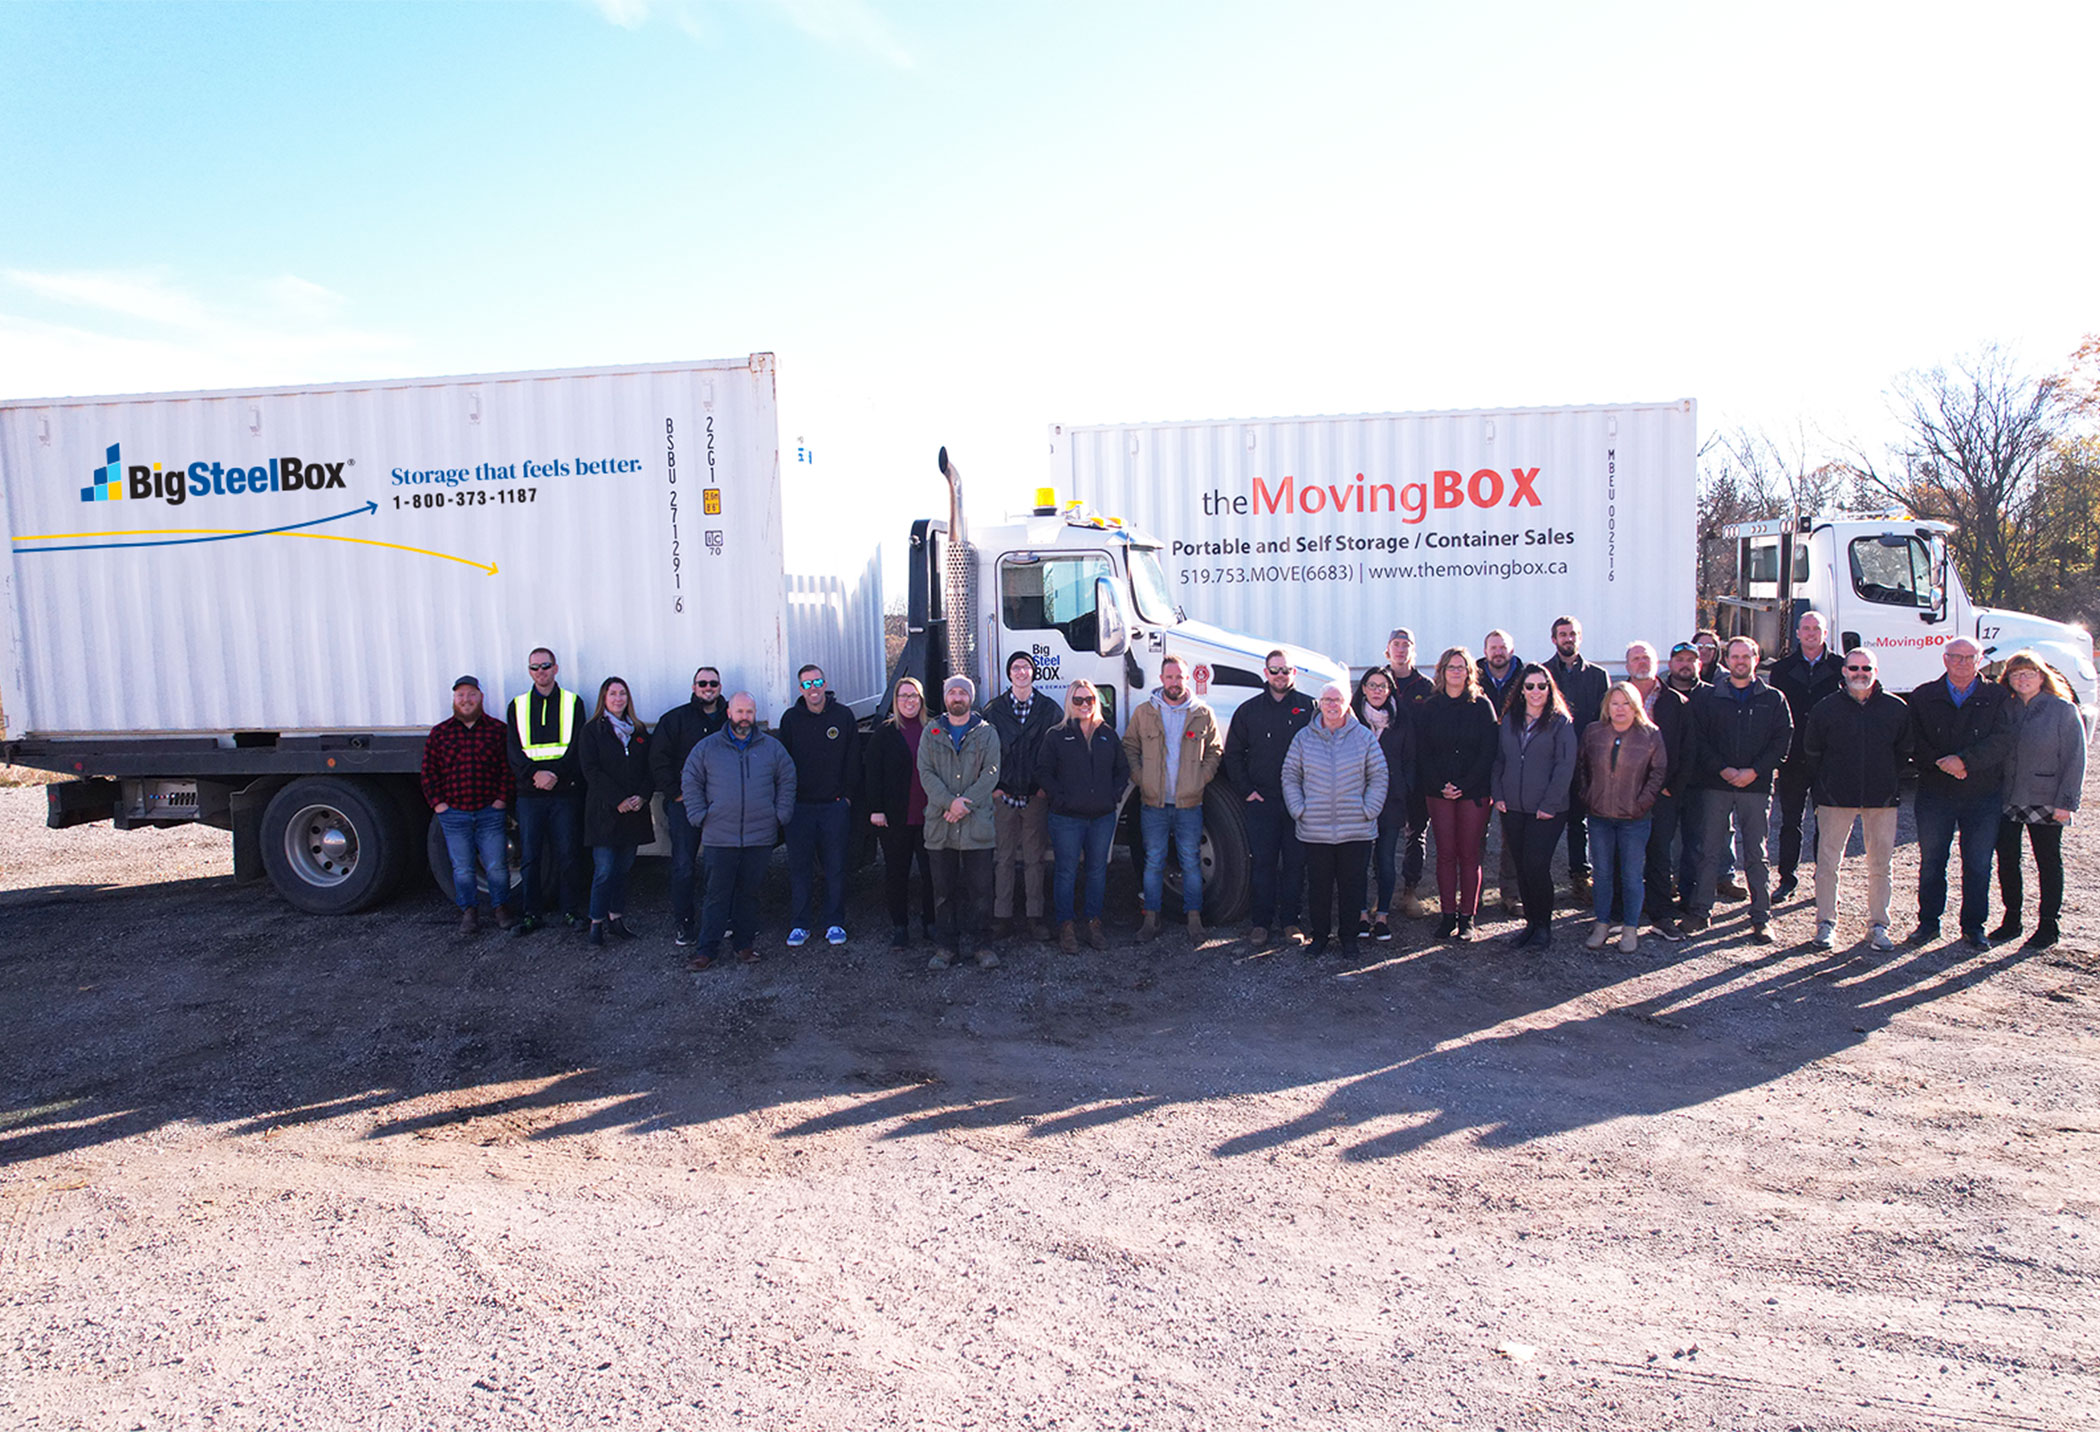 Staff of BigSteelBox and The Moving Box